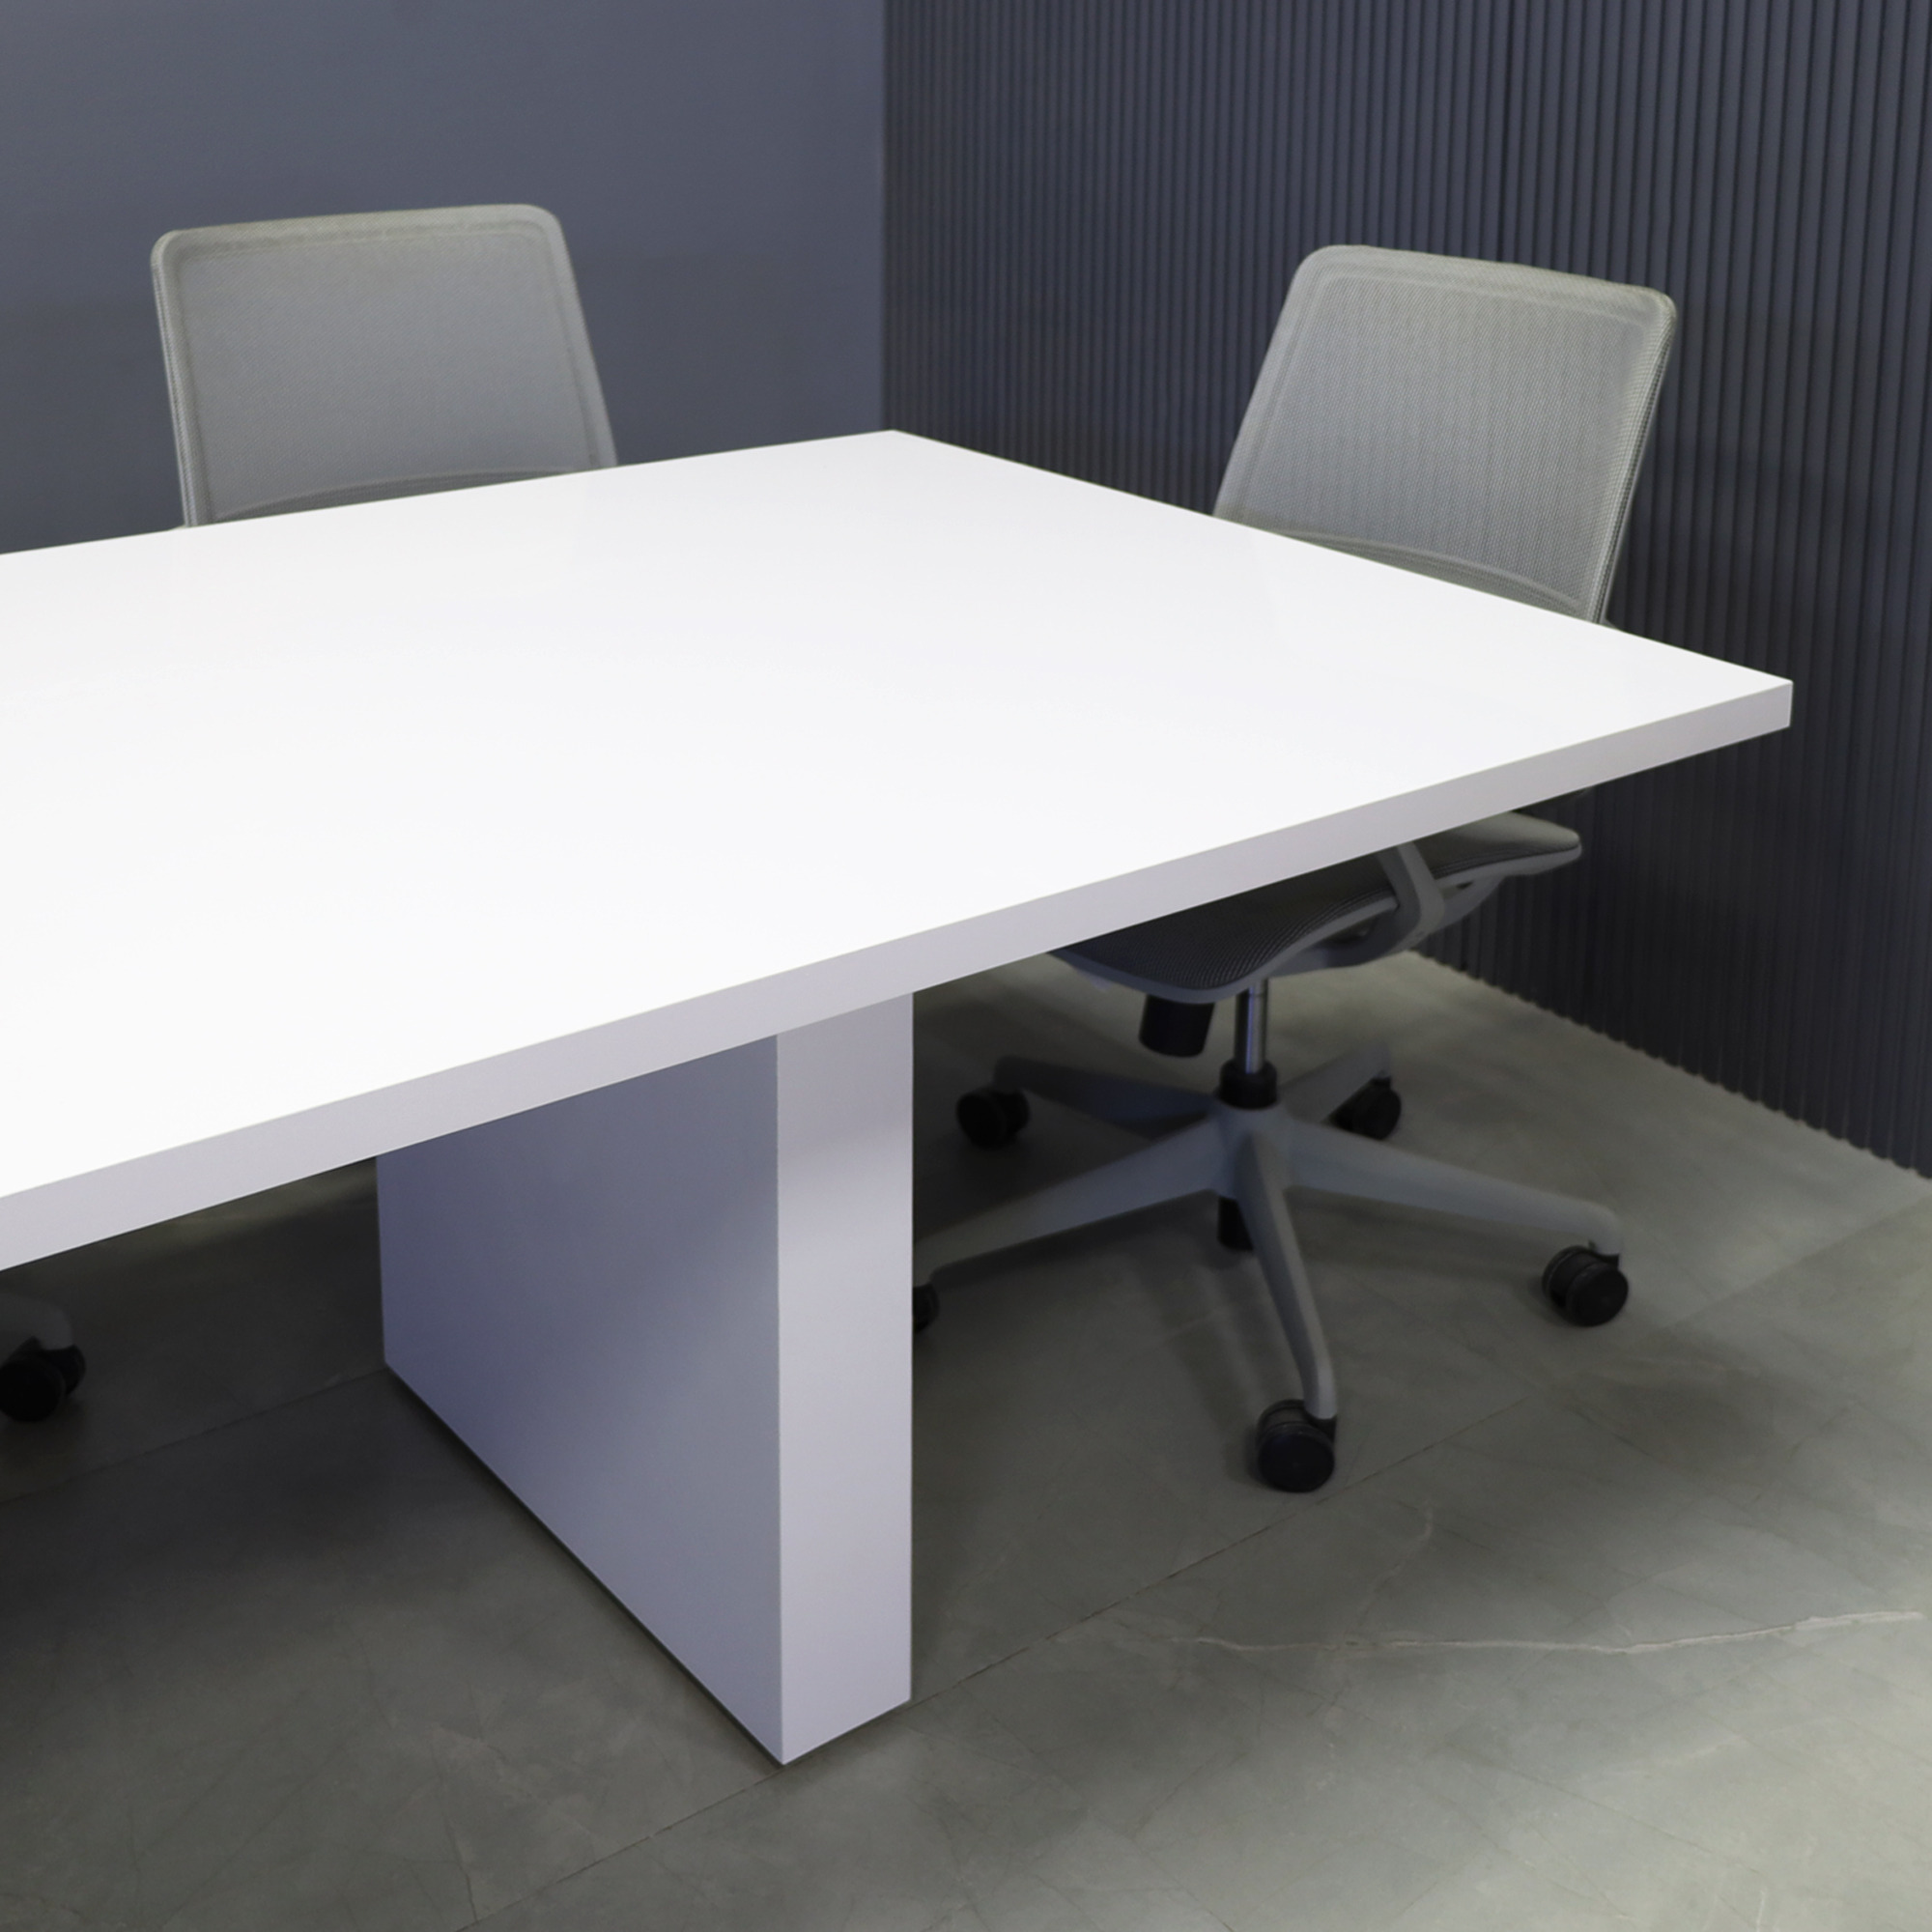 90-inch Newton Rectangular Conference Table in white gloss laminate for the top and base, with one silver MX2 powerbox, shown here.